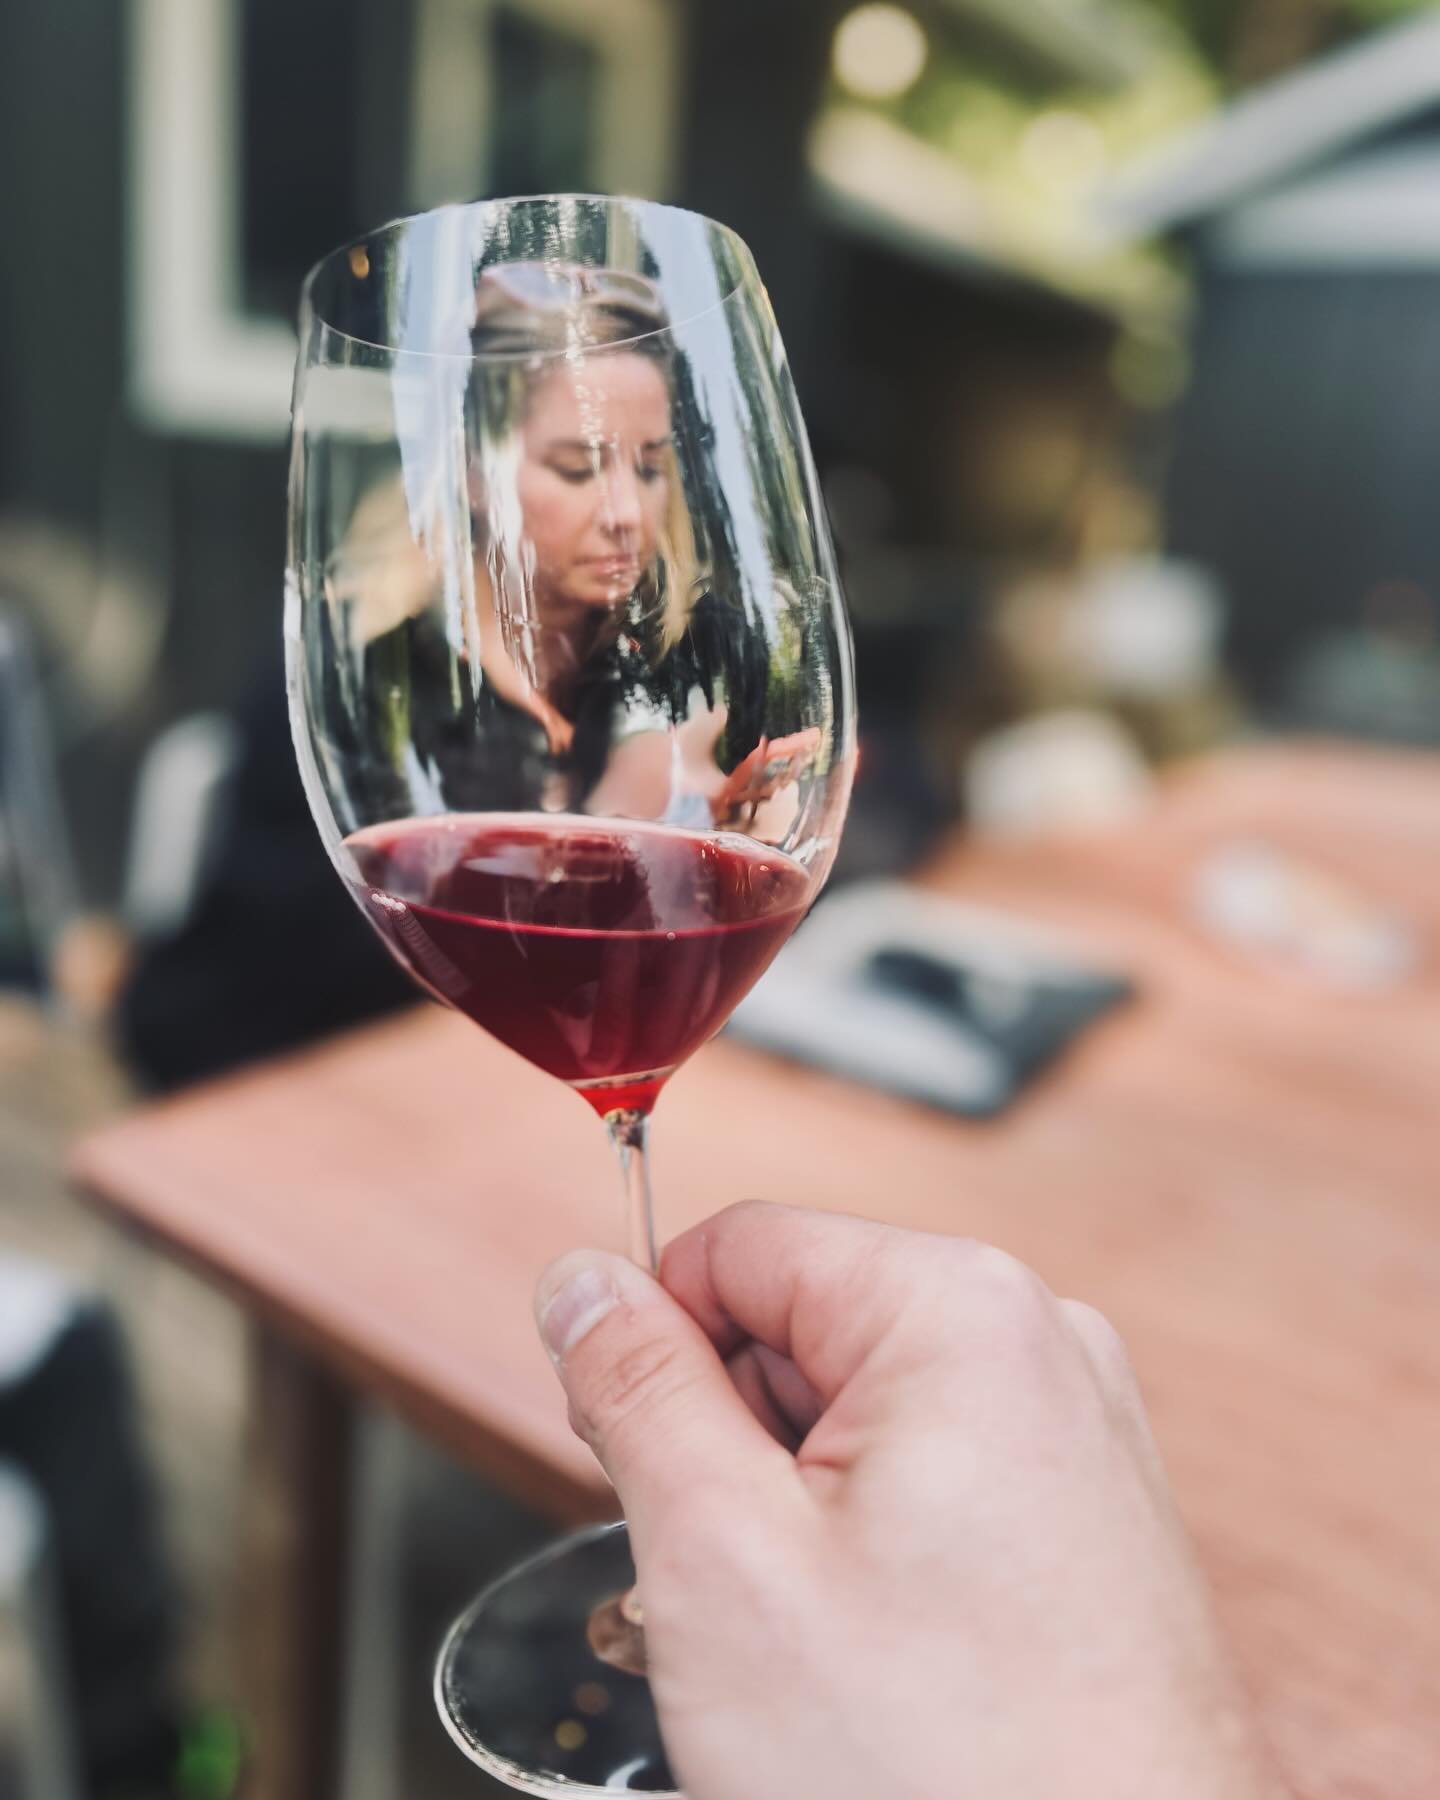 Get off your phone and drink Gamay. 

#drinkgamay #oregongamay #guerrillawineco